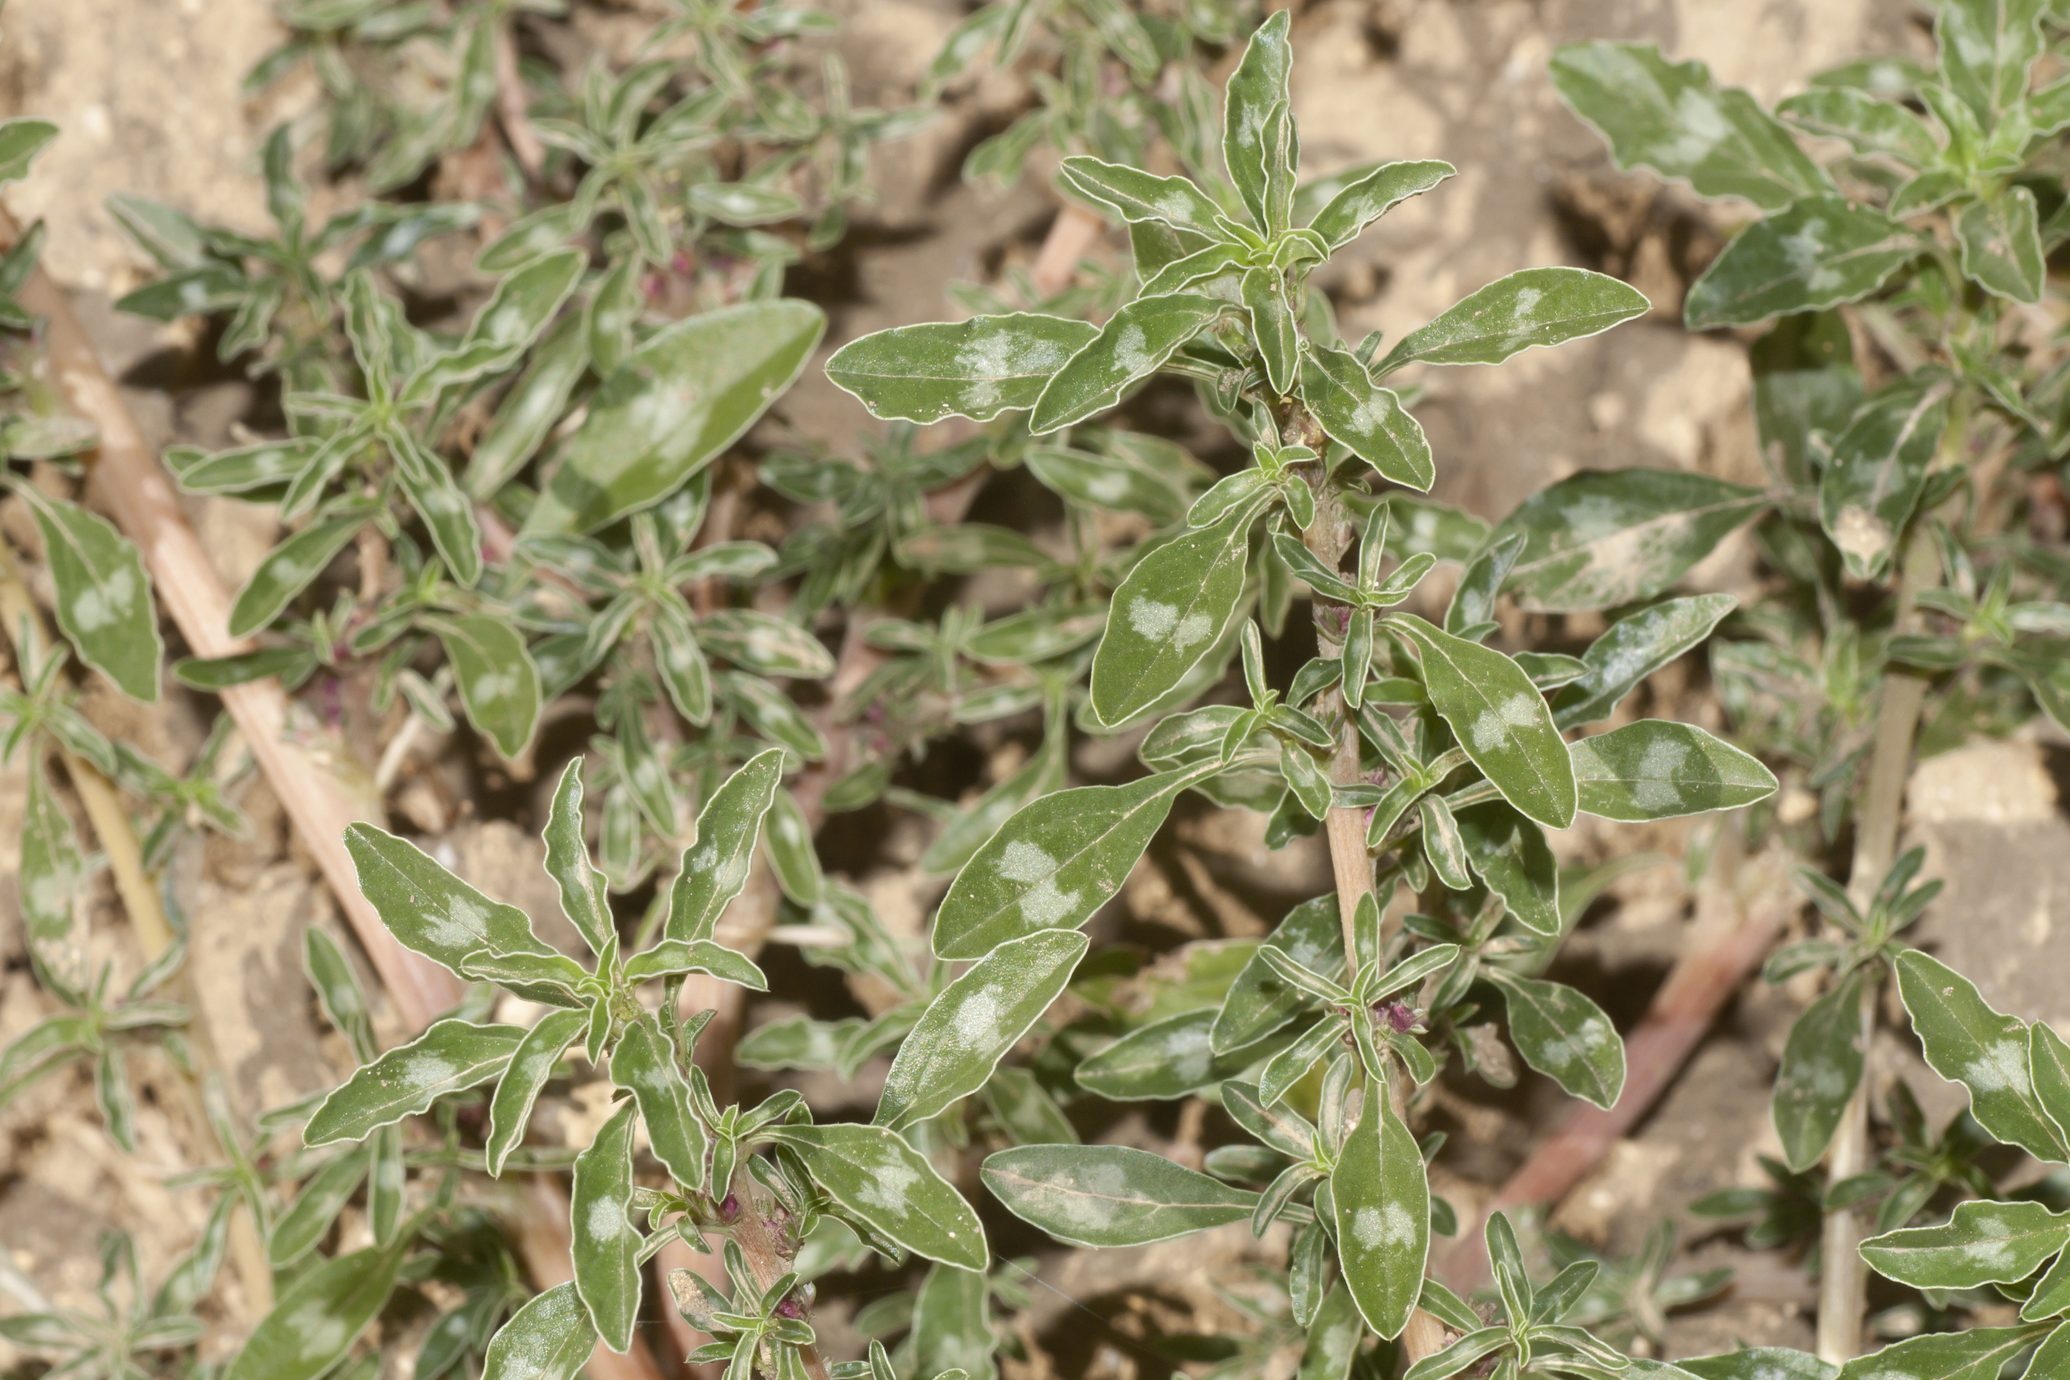 What Is Pigweed and How Do I Get Rid of It?